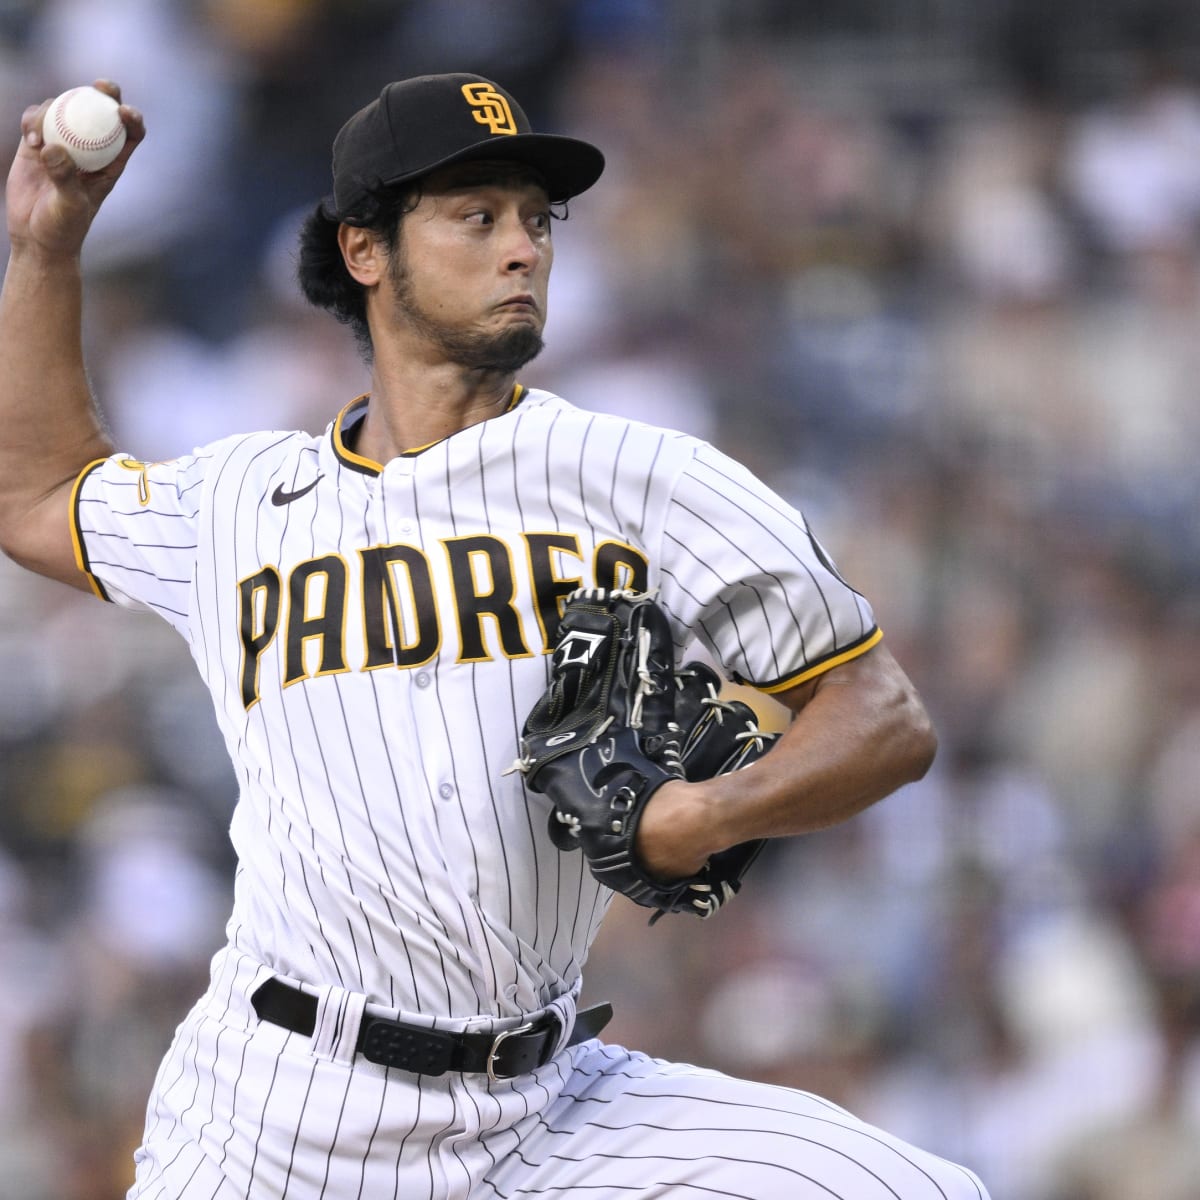 MLB: Injured Yu Darvish avoids significant elbow damage: report